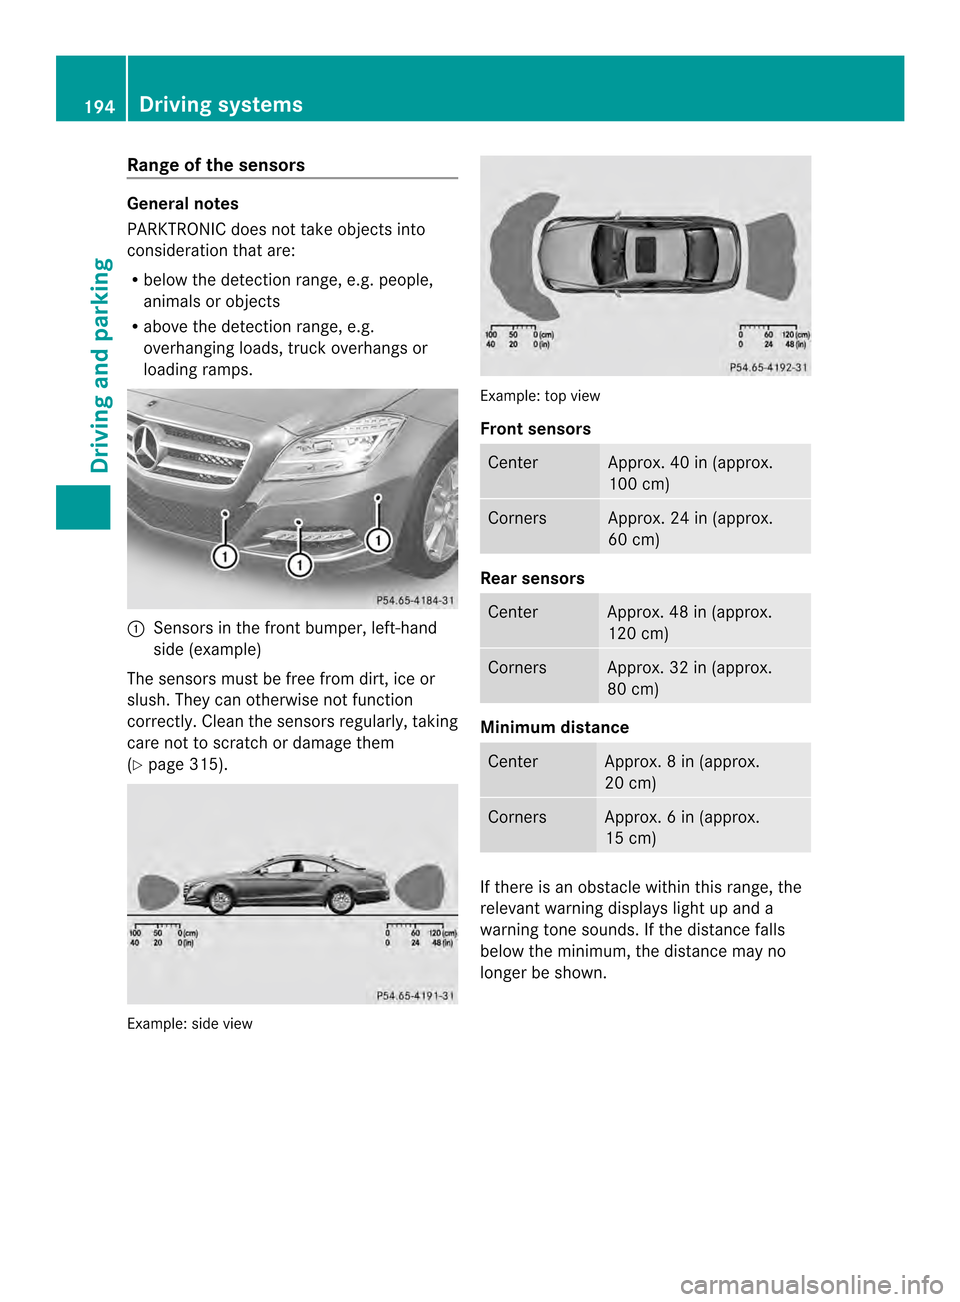 MERCEDES-BENZ CLS-Class 2014 W218 Owners Manual Rang
eoft he sensors General notes
PARKTRONIC doe
snot take objects into
consideration that are:
R below the detection range, e.g. people,
animal sorobjects
R above the detection range, e.g.
overhangi